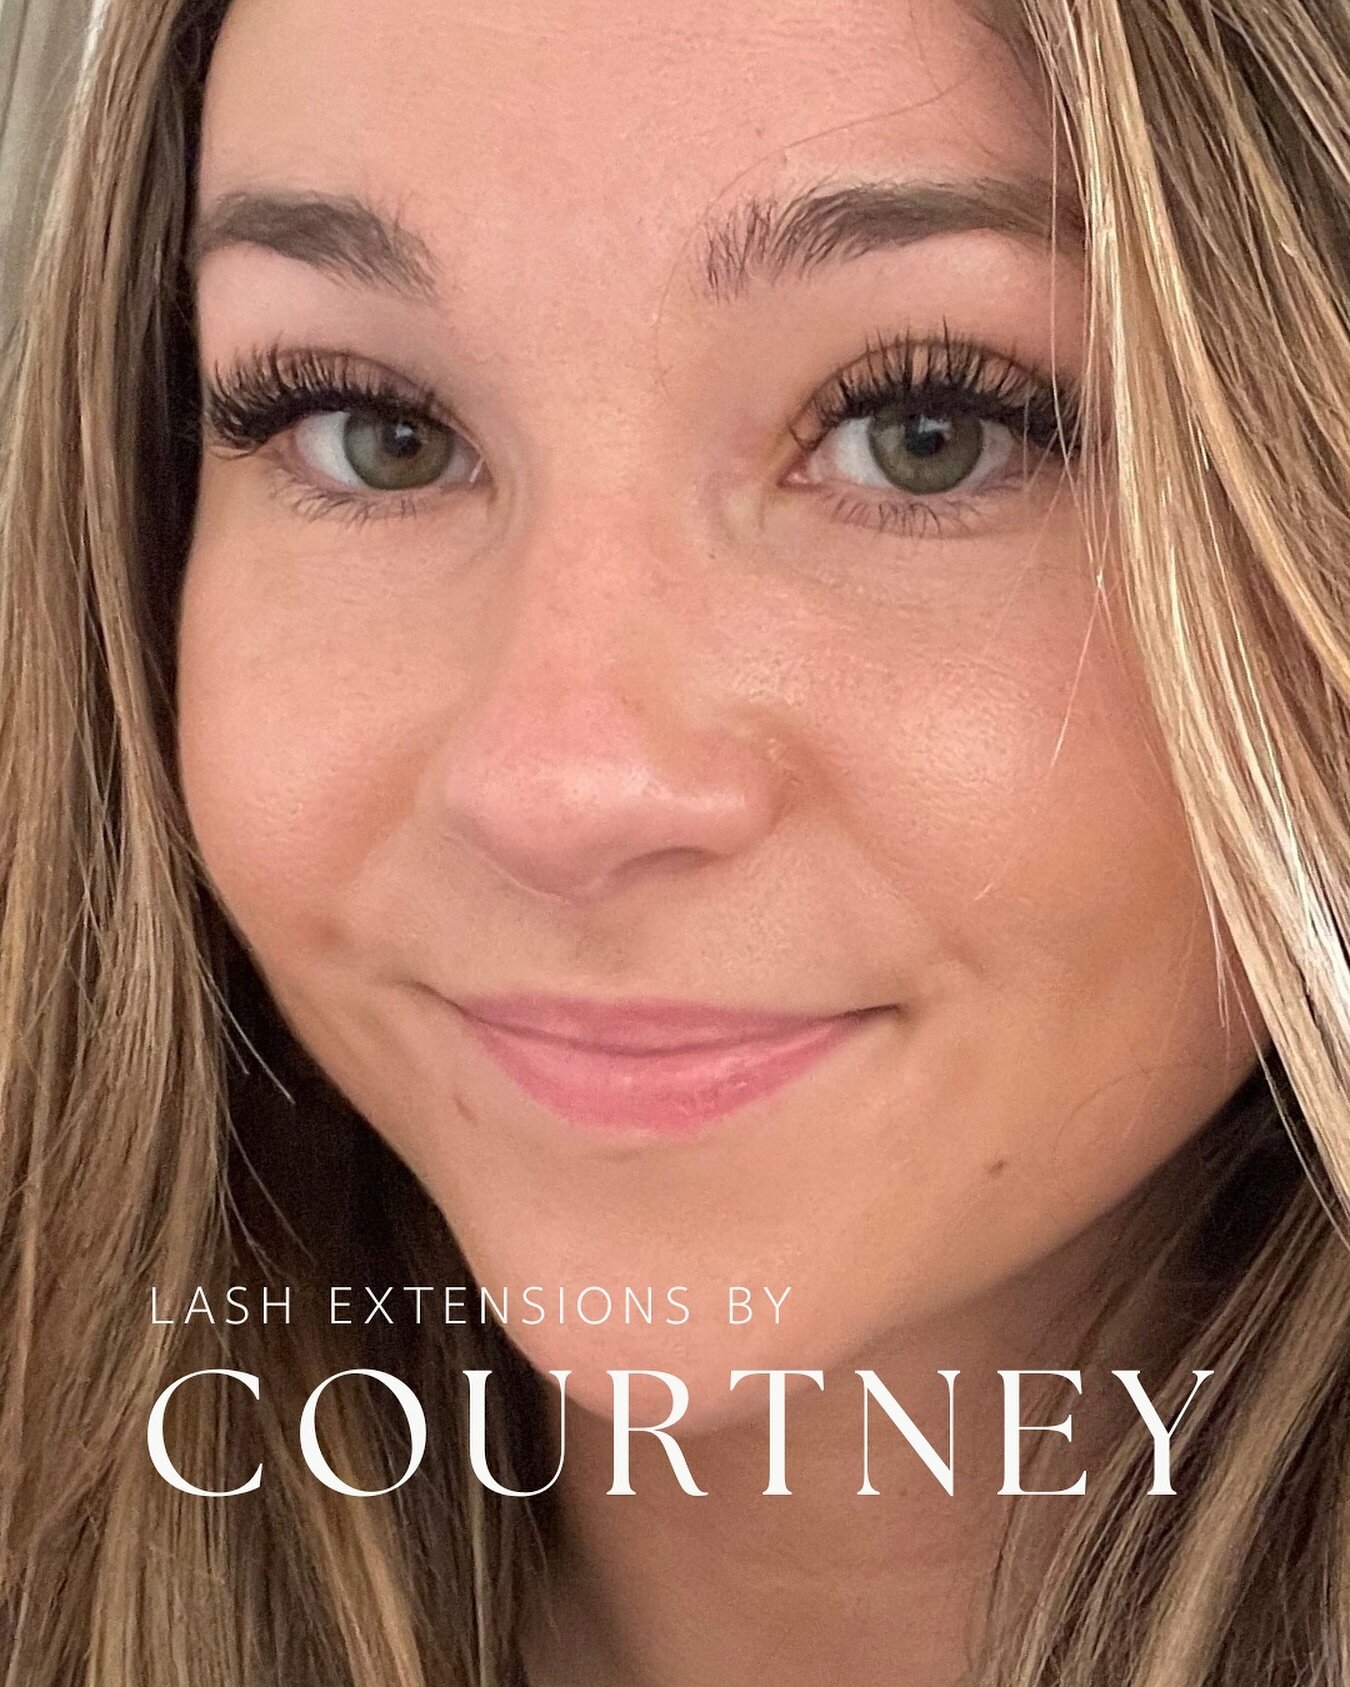 IT&rsquo;S ALMOST SPRING BREAK🌺TIME FOR LASHES

There&rsquo;s still time to book an appointment with Courtney before vacation! Make your beach routine a breeze by having lashes you wake up with that will last your entire trip☀️

No need for makeup, 